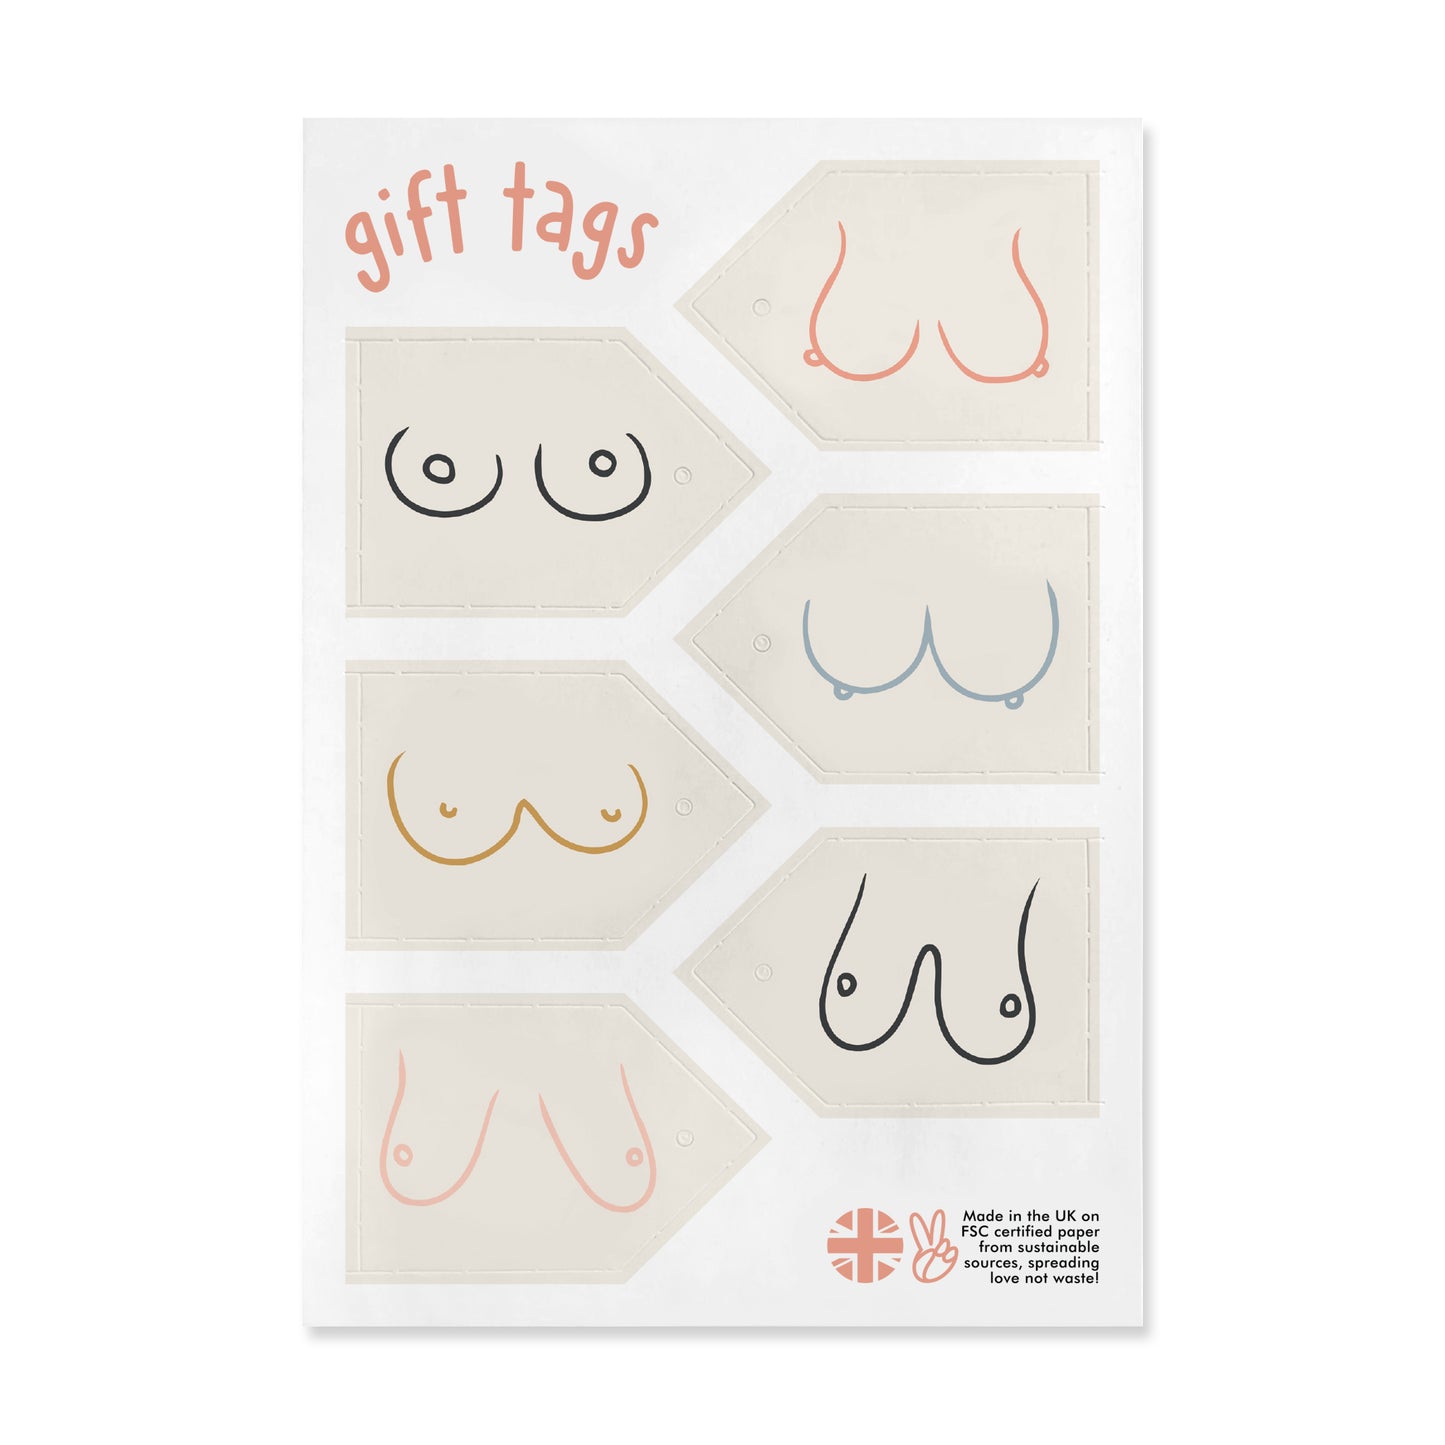 Boobs Wrapping Paper - 6 Sheets of Gift Wrap - 'Double Boobs' - White Gift Wrap - For Women Her